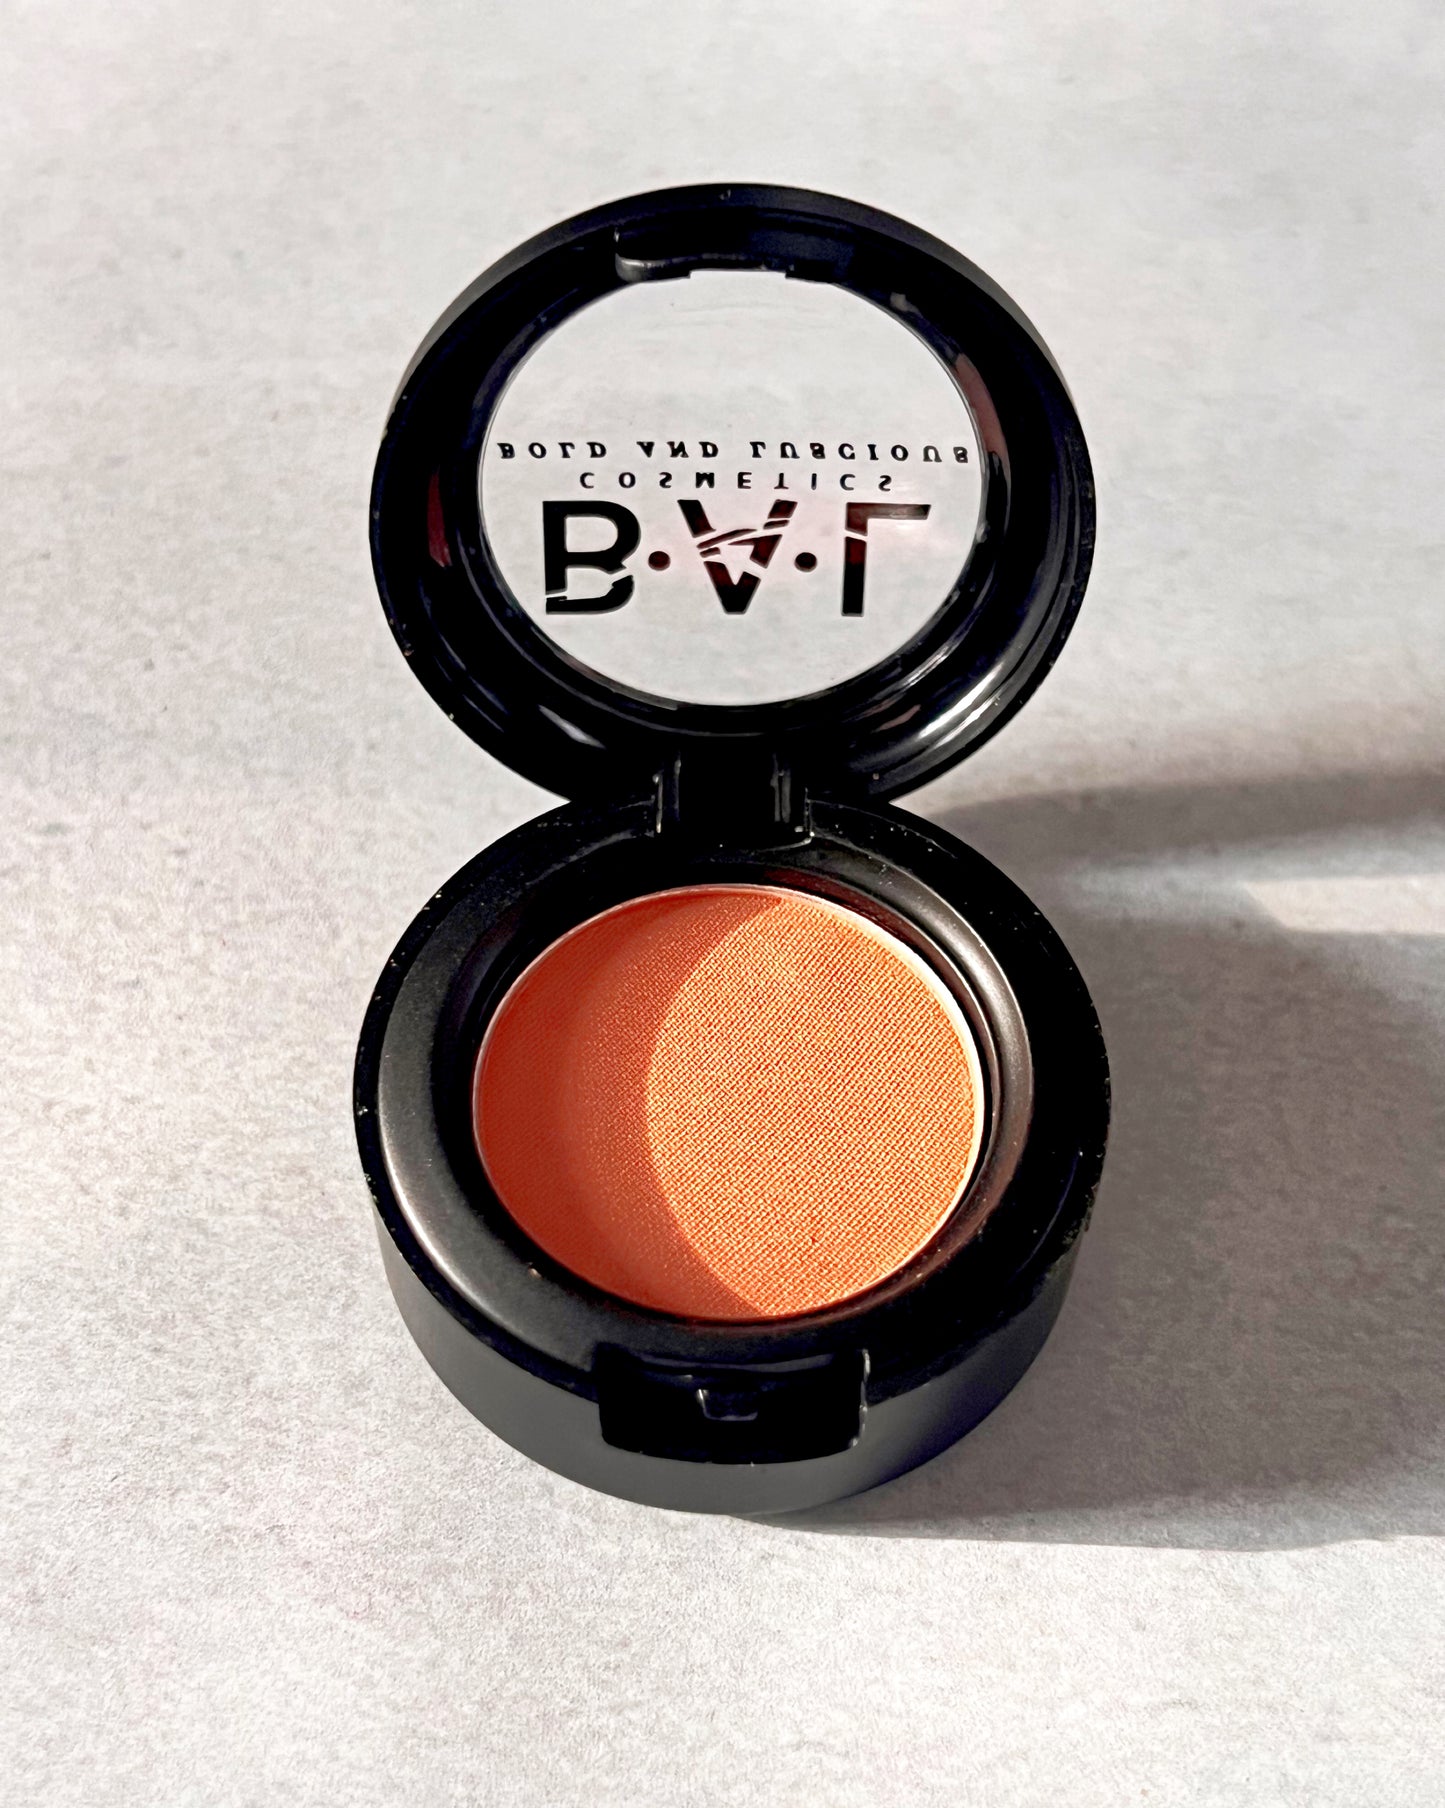 A neutral Orange tangerine pastel shade. The Bold and Luscious logo is visible. on the lid.